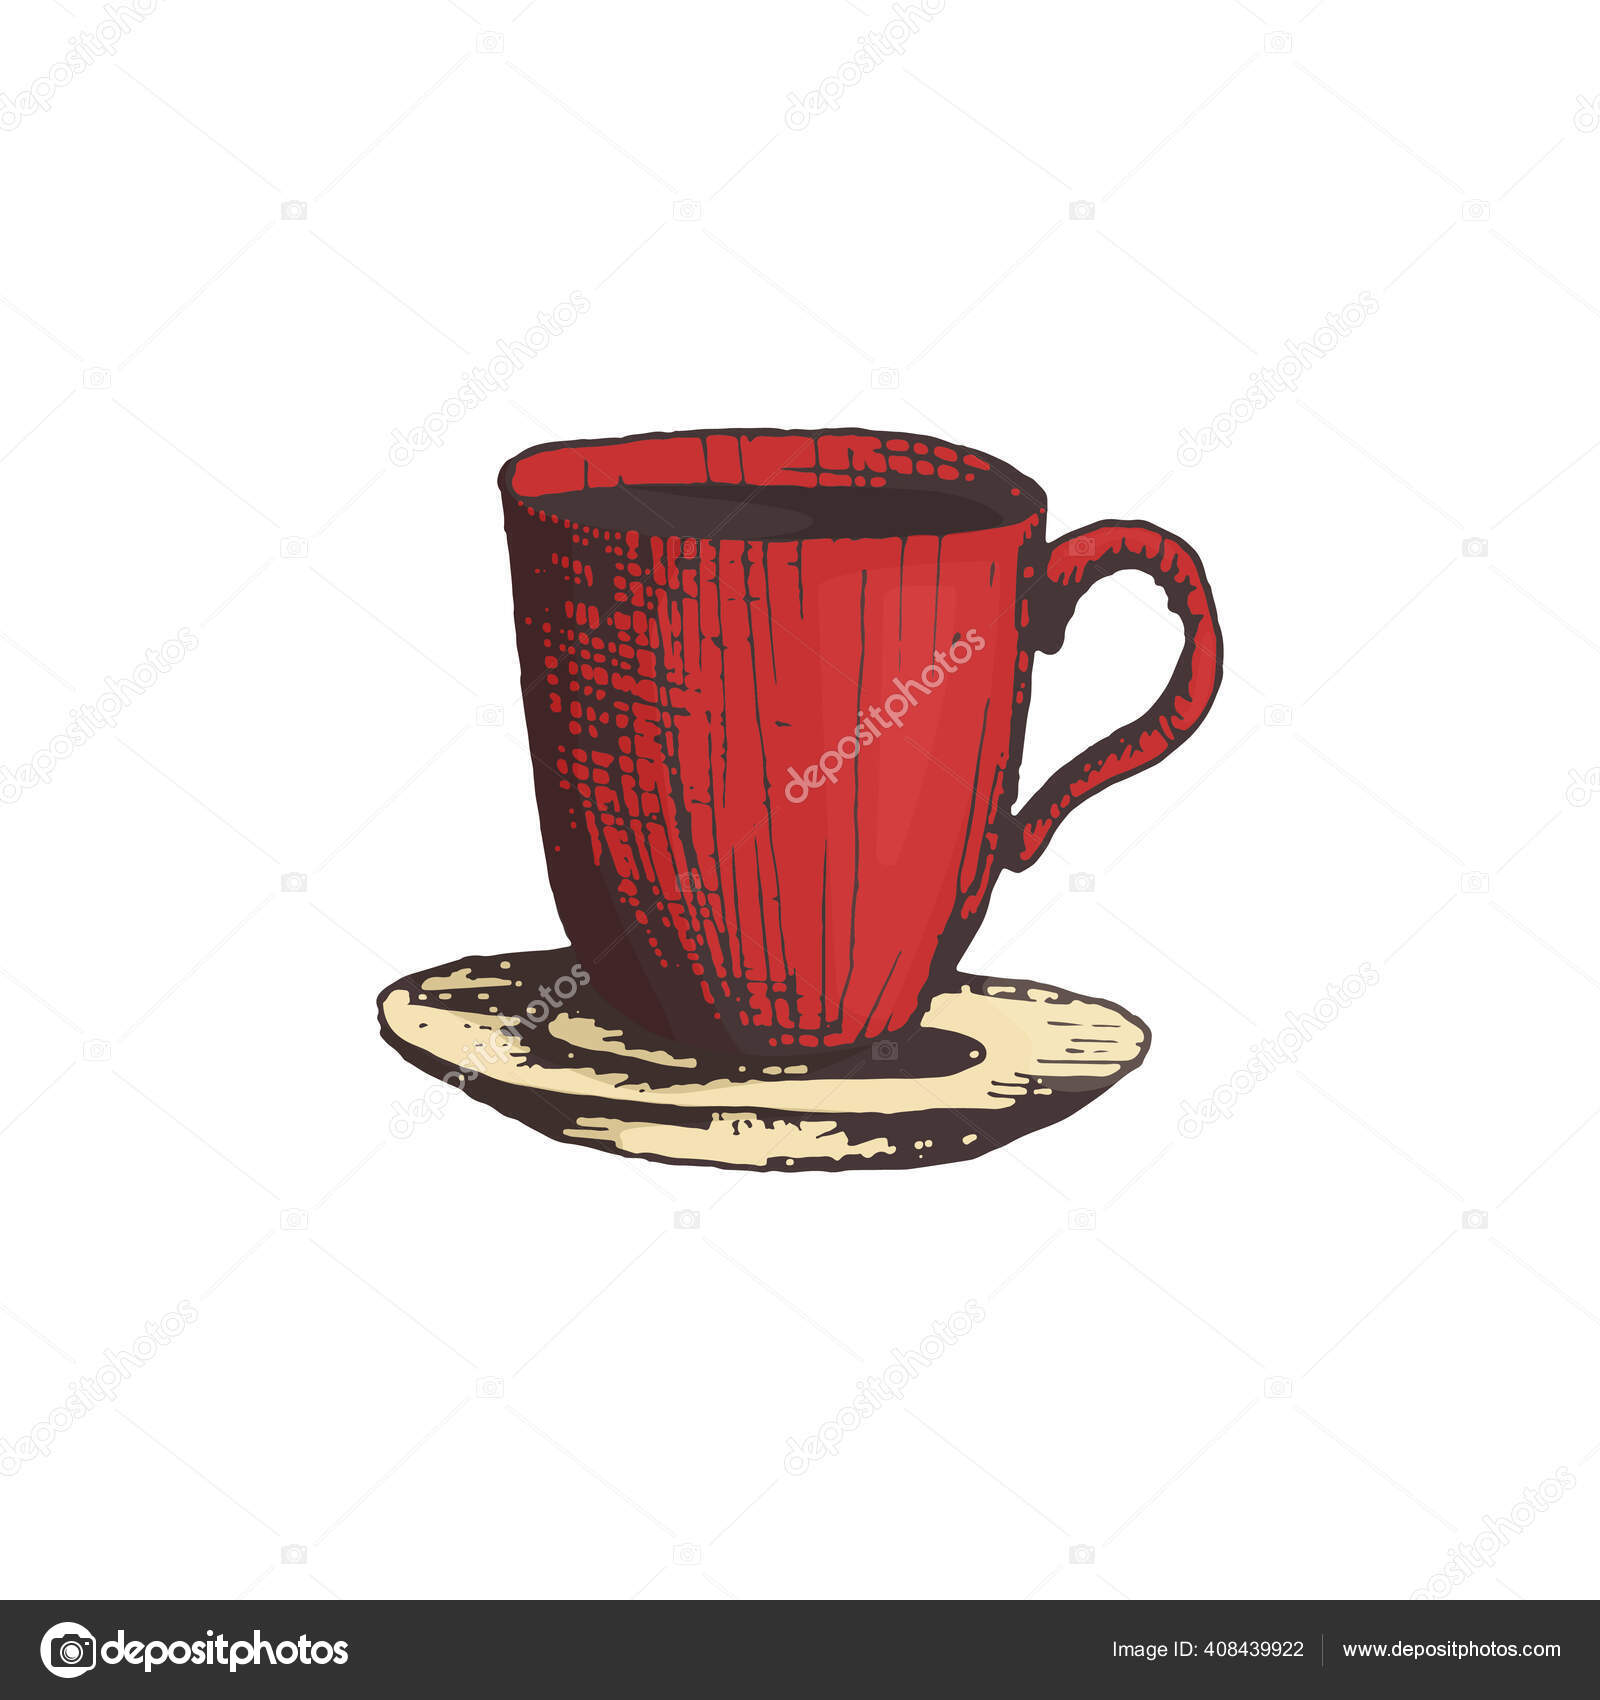 Drawings from Observation - Coffee Mugs by MelloMedia on DeviantArt